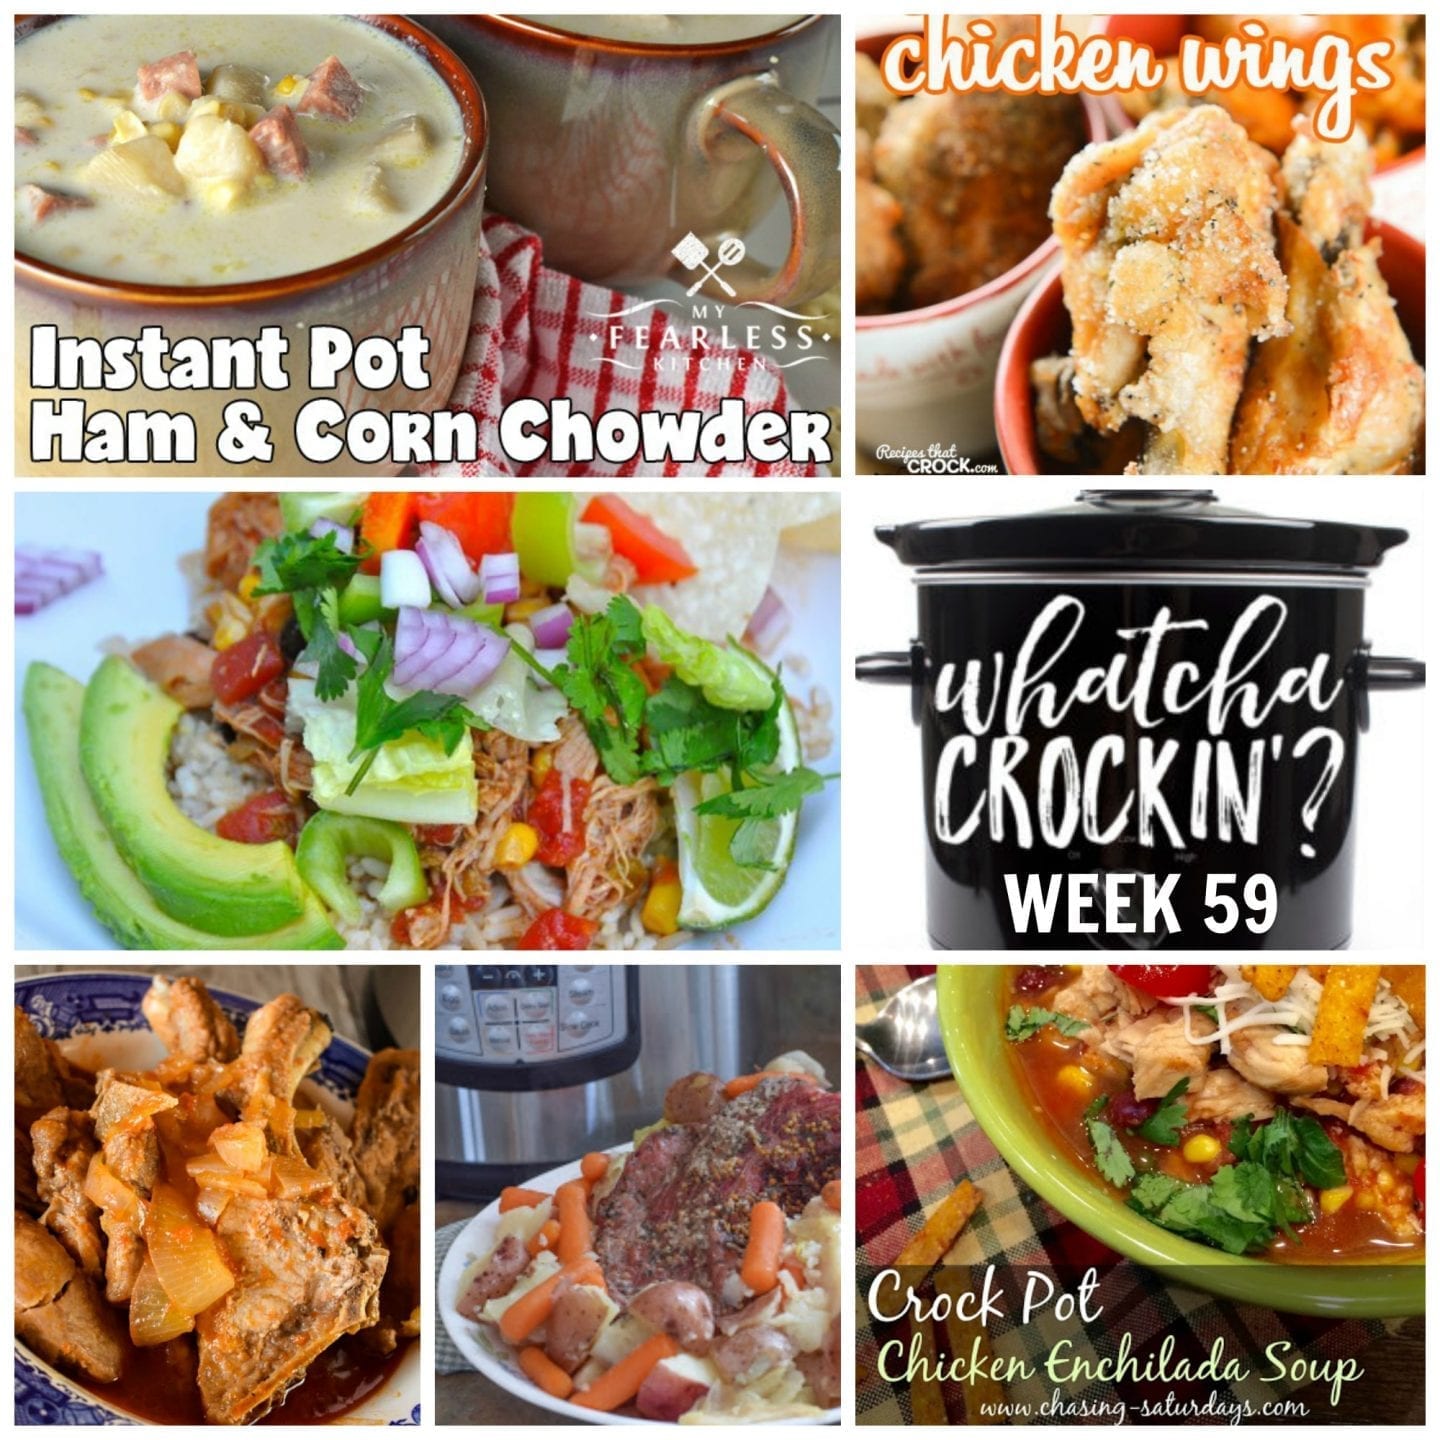 This week’s Whatcha Crockin’ crock pot recipes include Slow Cooker Pulled Chicken, Instant Pot Ham and Corn Chowder,  Crock Pot Chicken Enchilada Soup, Instant Corned Beef and Cabbage, Gramma's Beef Barley Soup, Instant Pot Pork Ribs, Crock Pot Chicken Wings, Crock Pot Chicken Taco Bowls, and many more! 